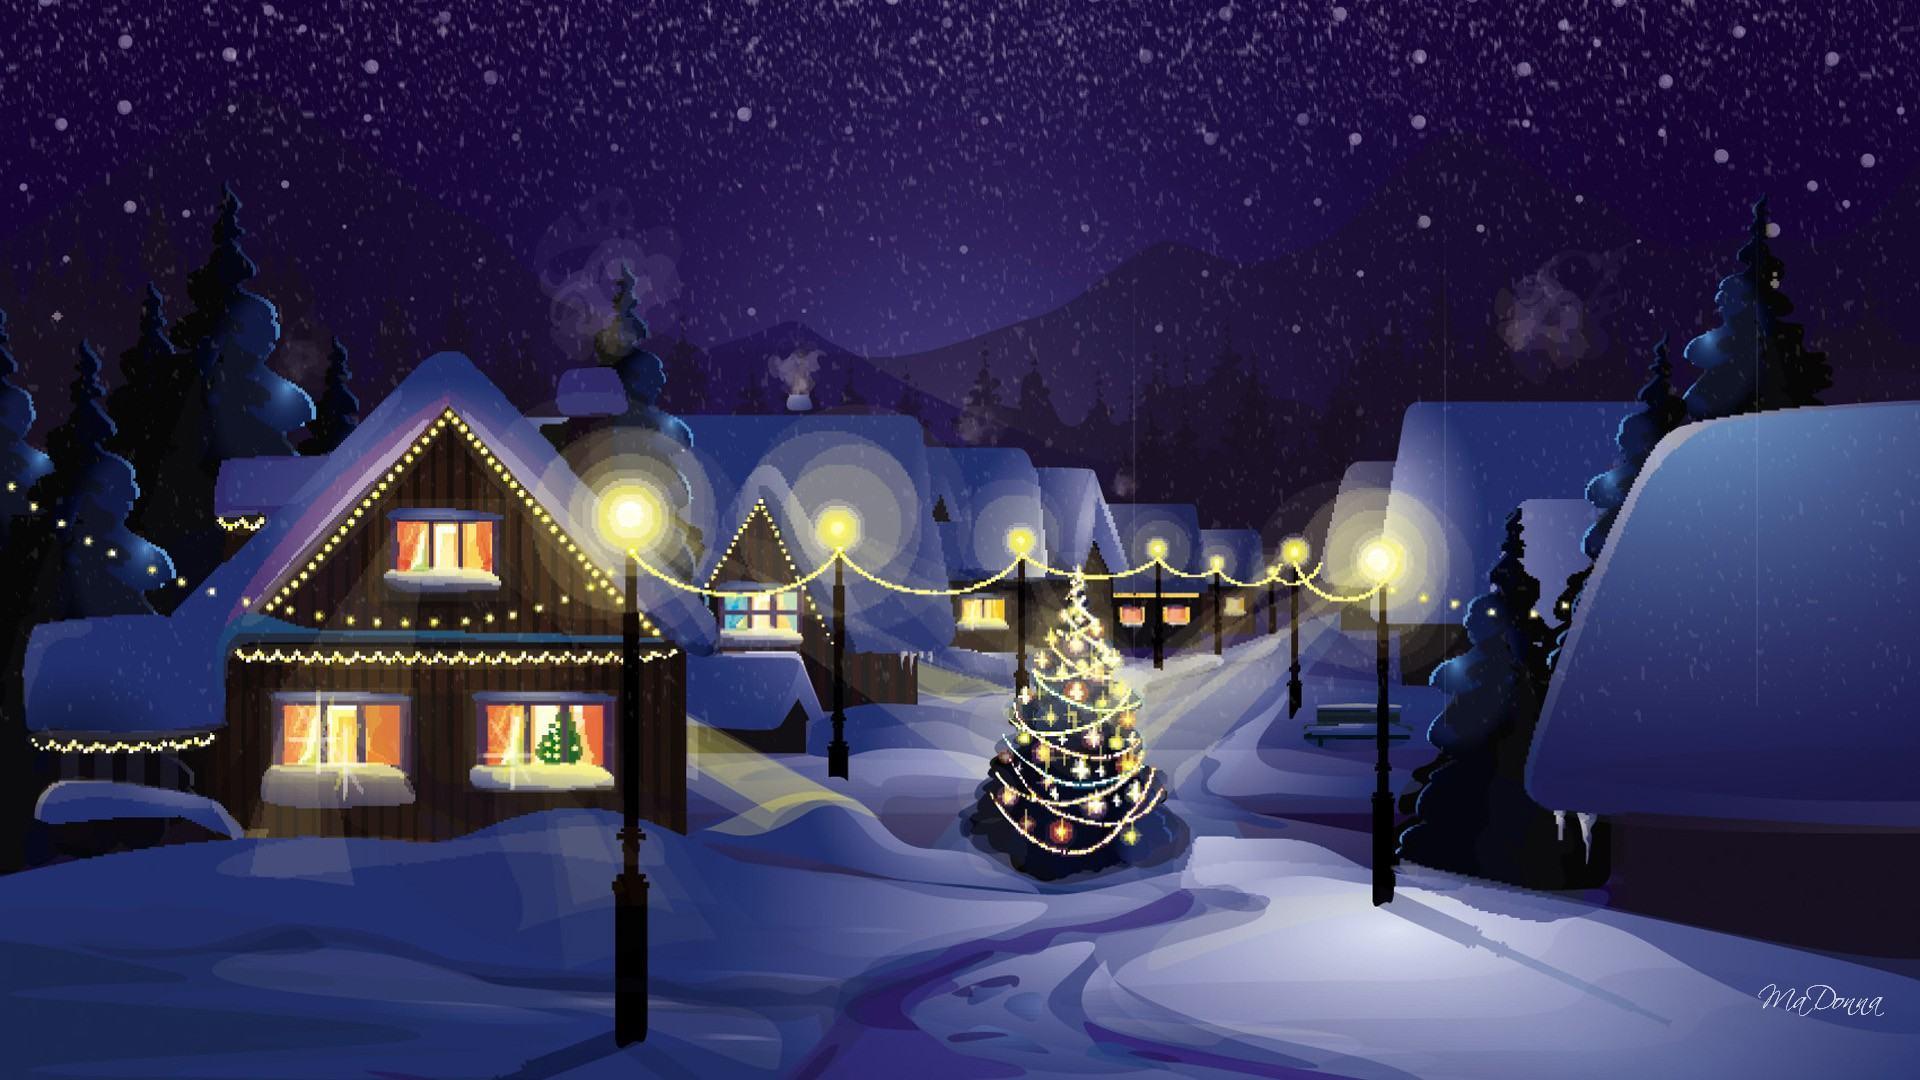 Download Christmas Village Wallpaper in HD from 2014